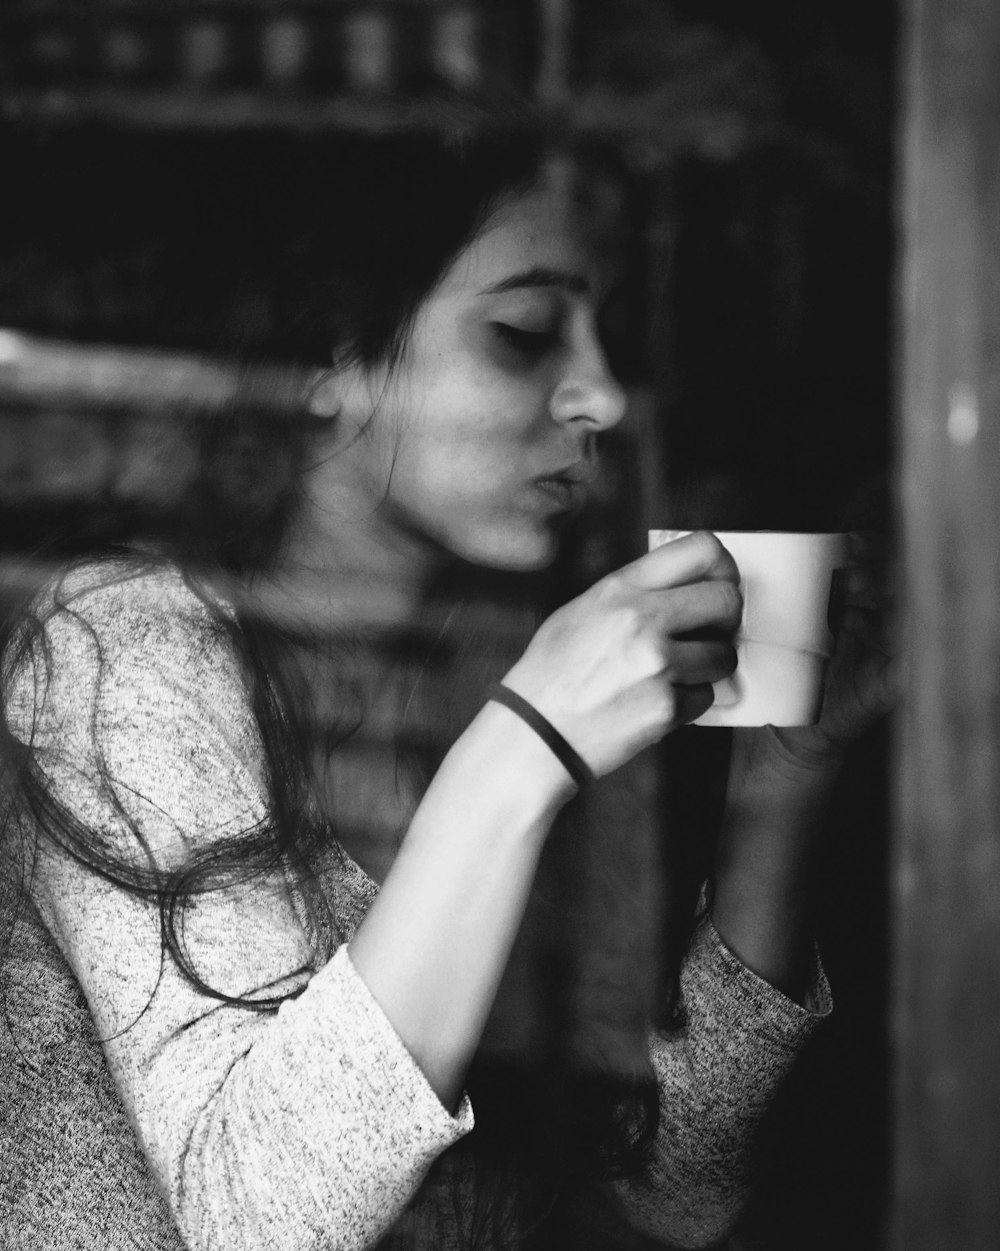 grayscale photo of a woman drinking from a cup